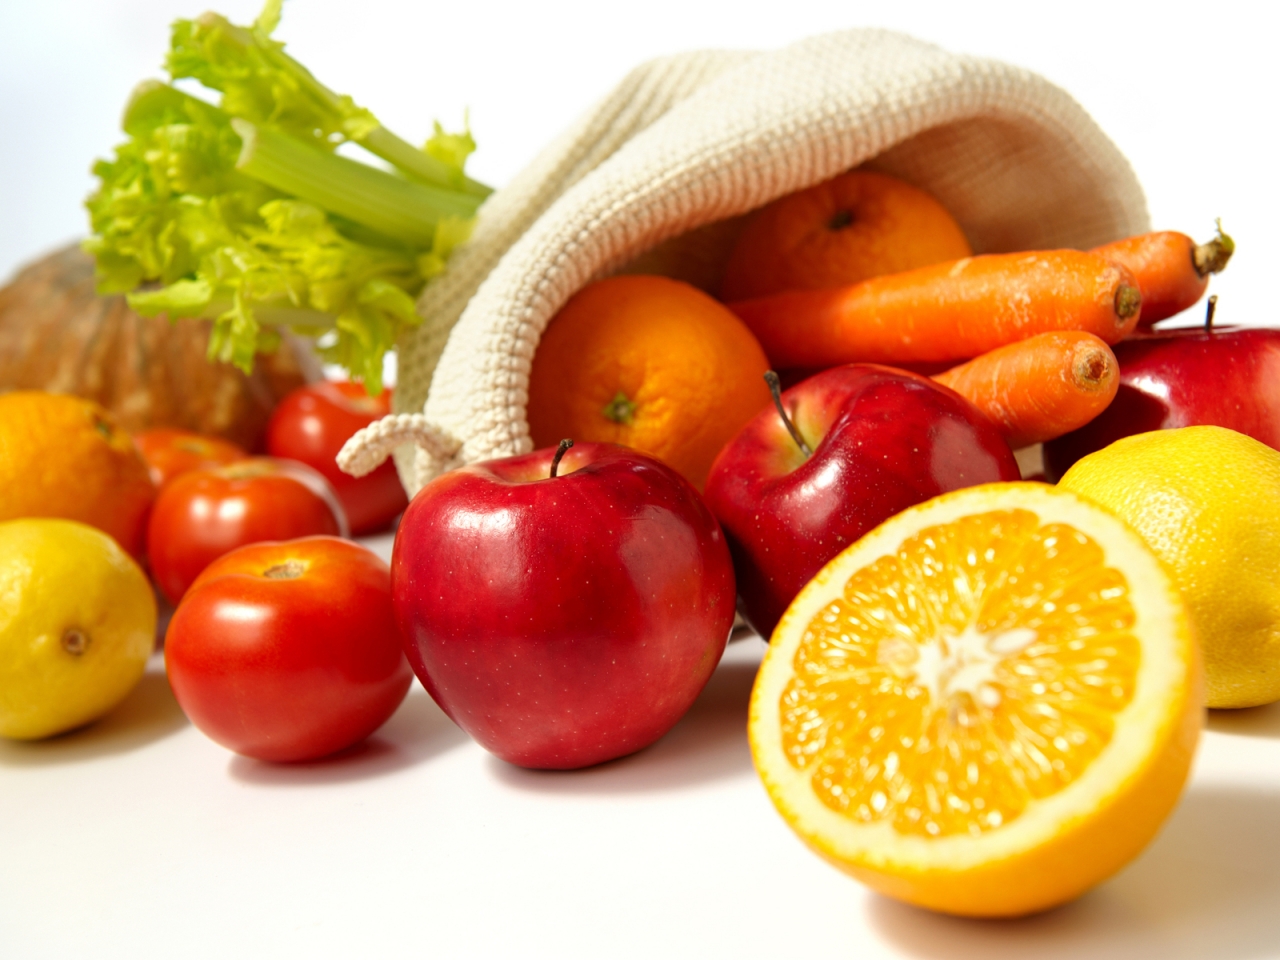 Fruits and Vegetables for 1280 x 960 resolution